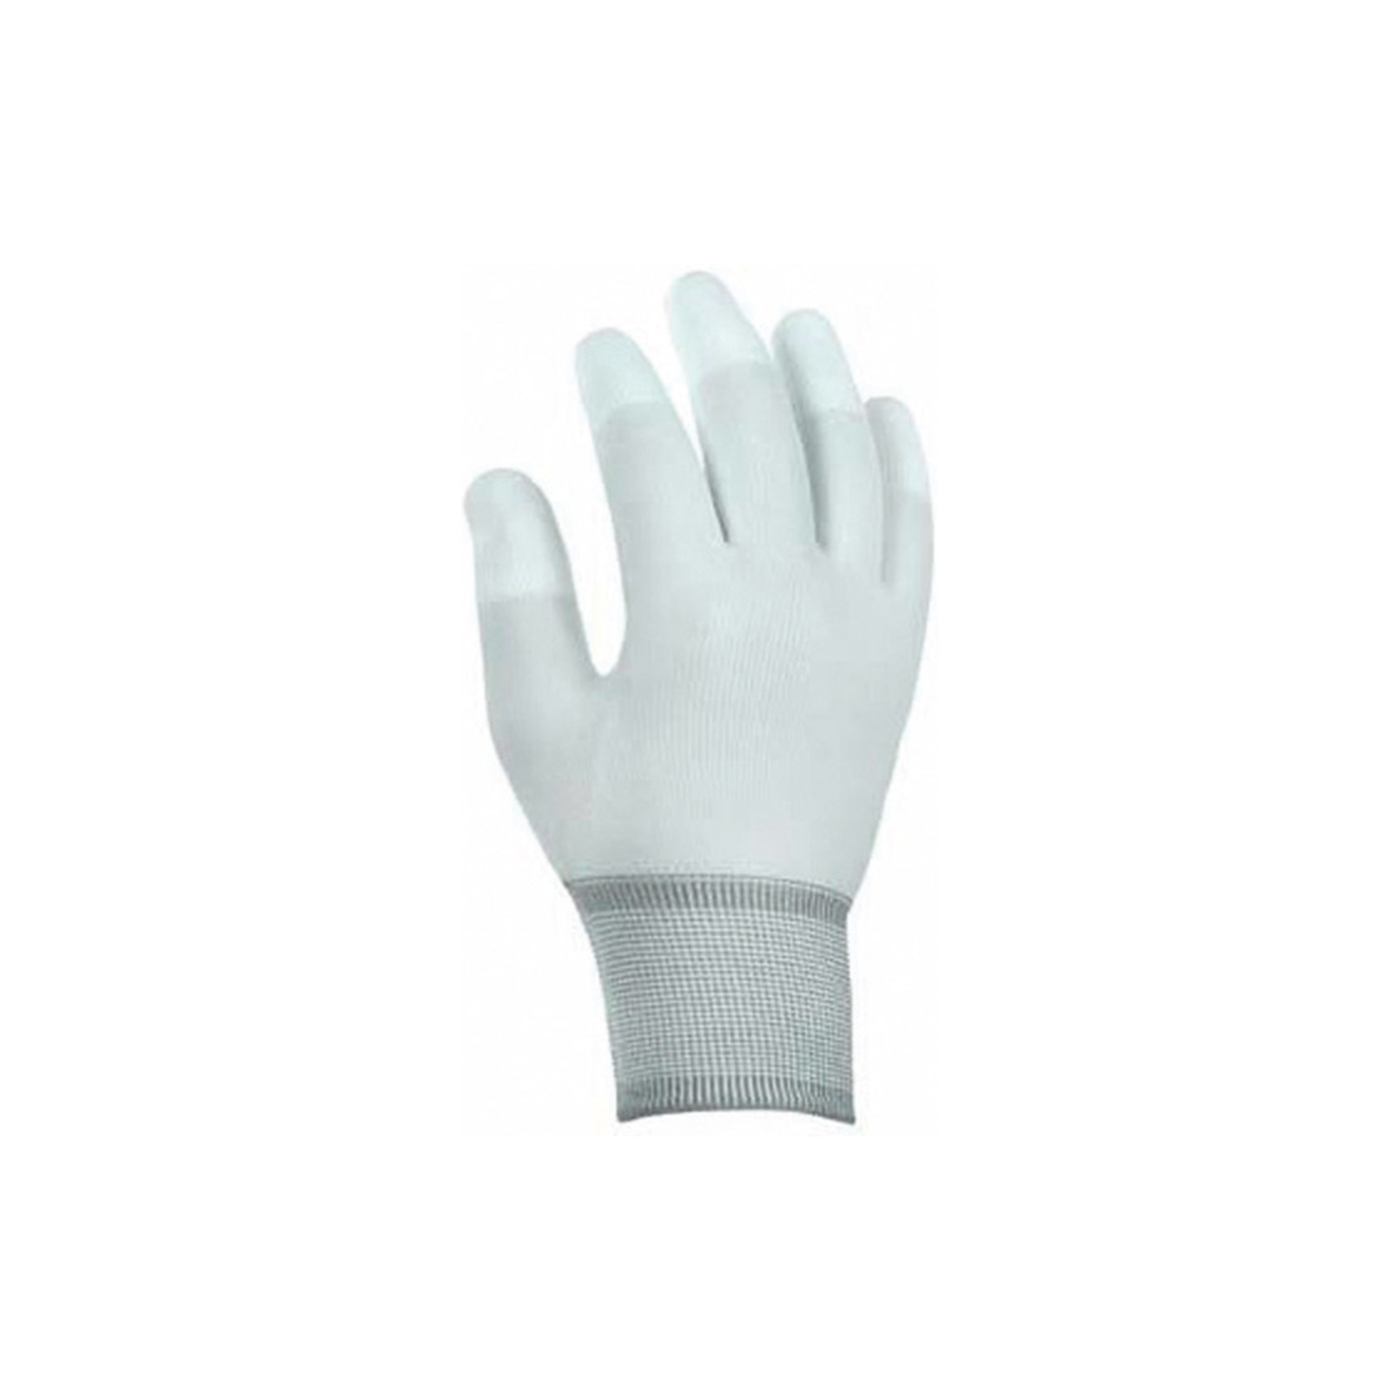 Nylon Knitted Gloves, Size L - 1 pair